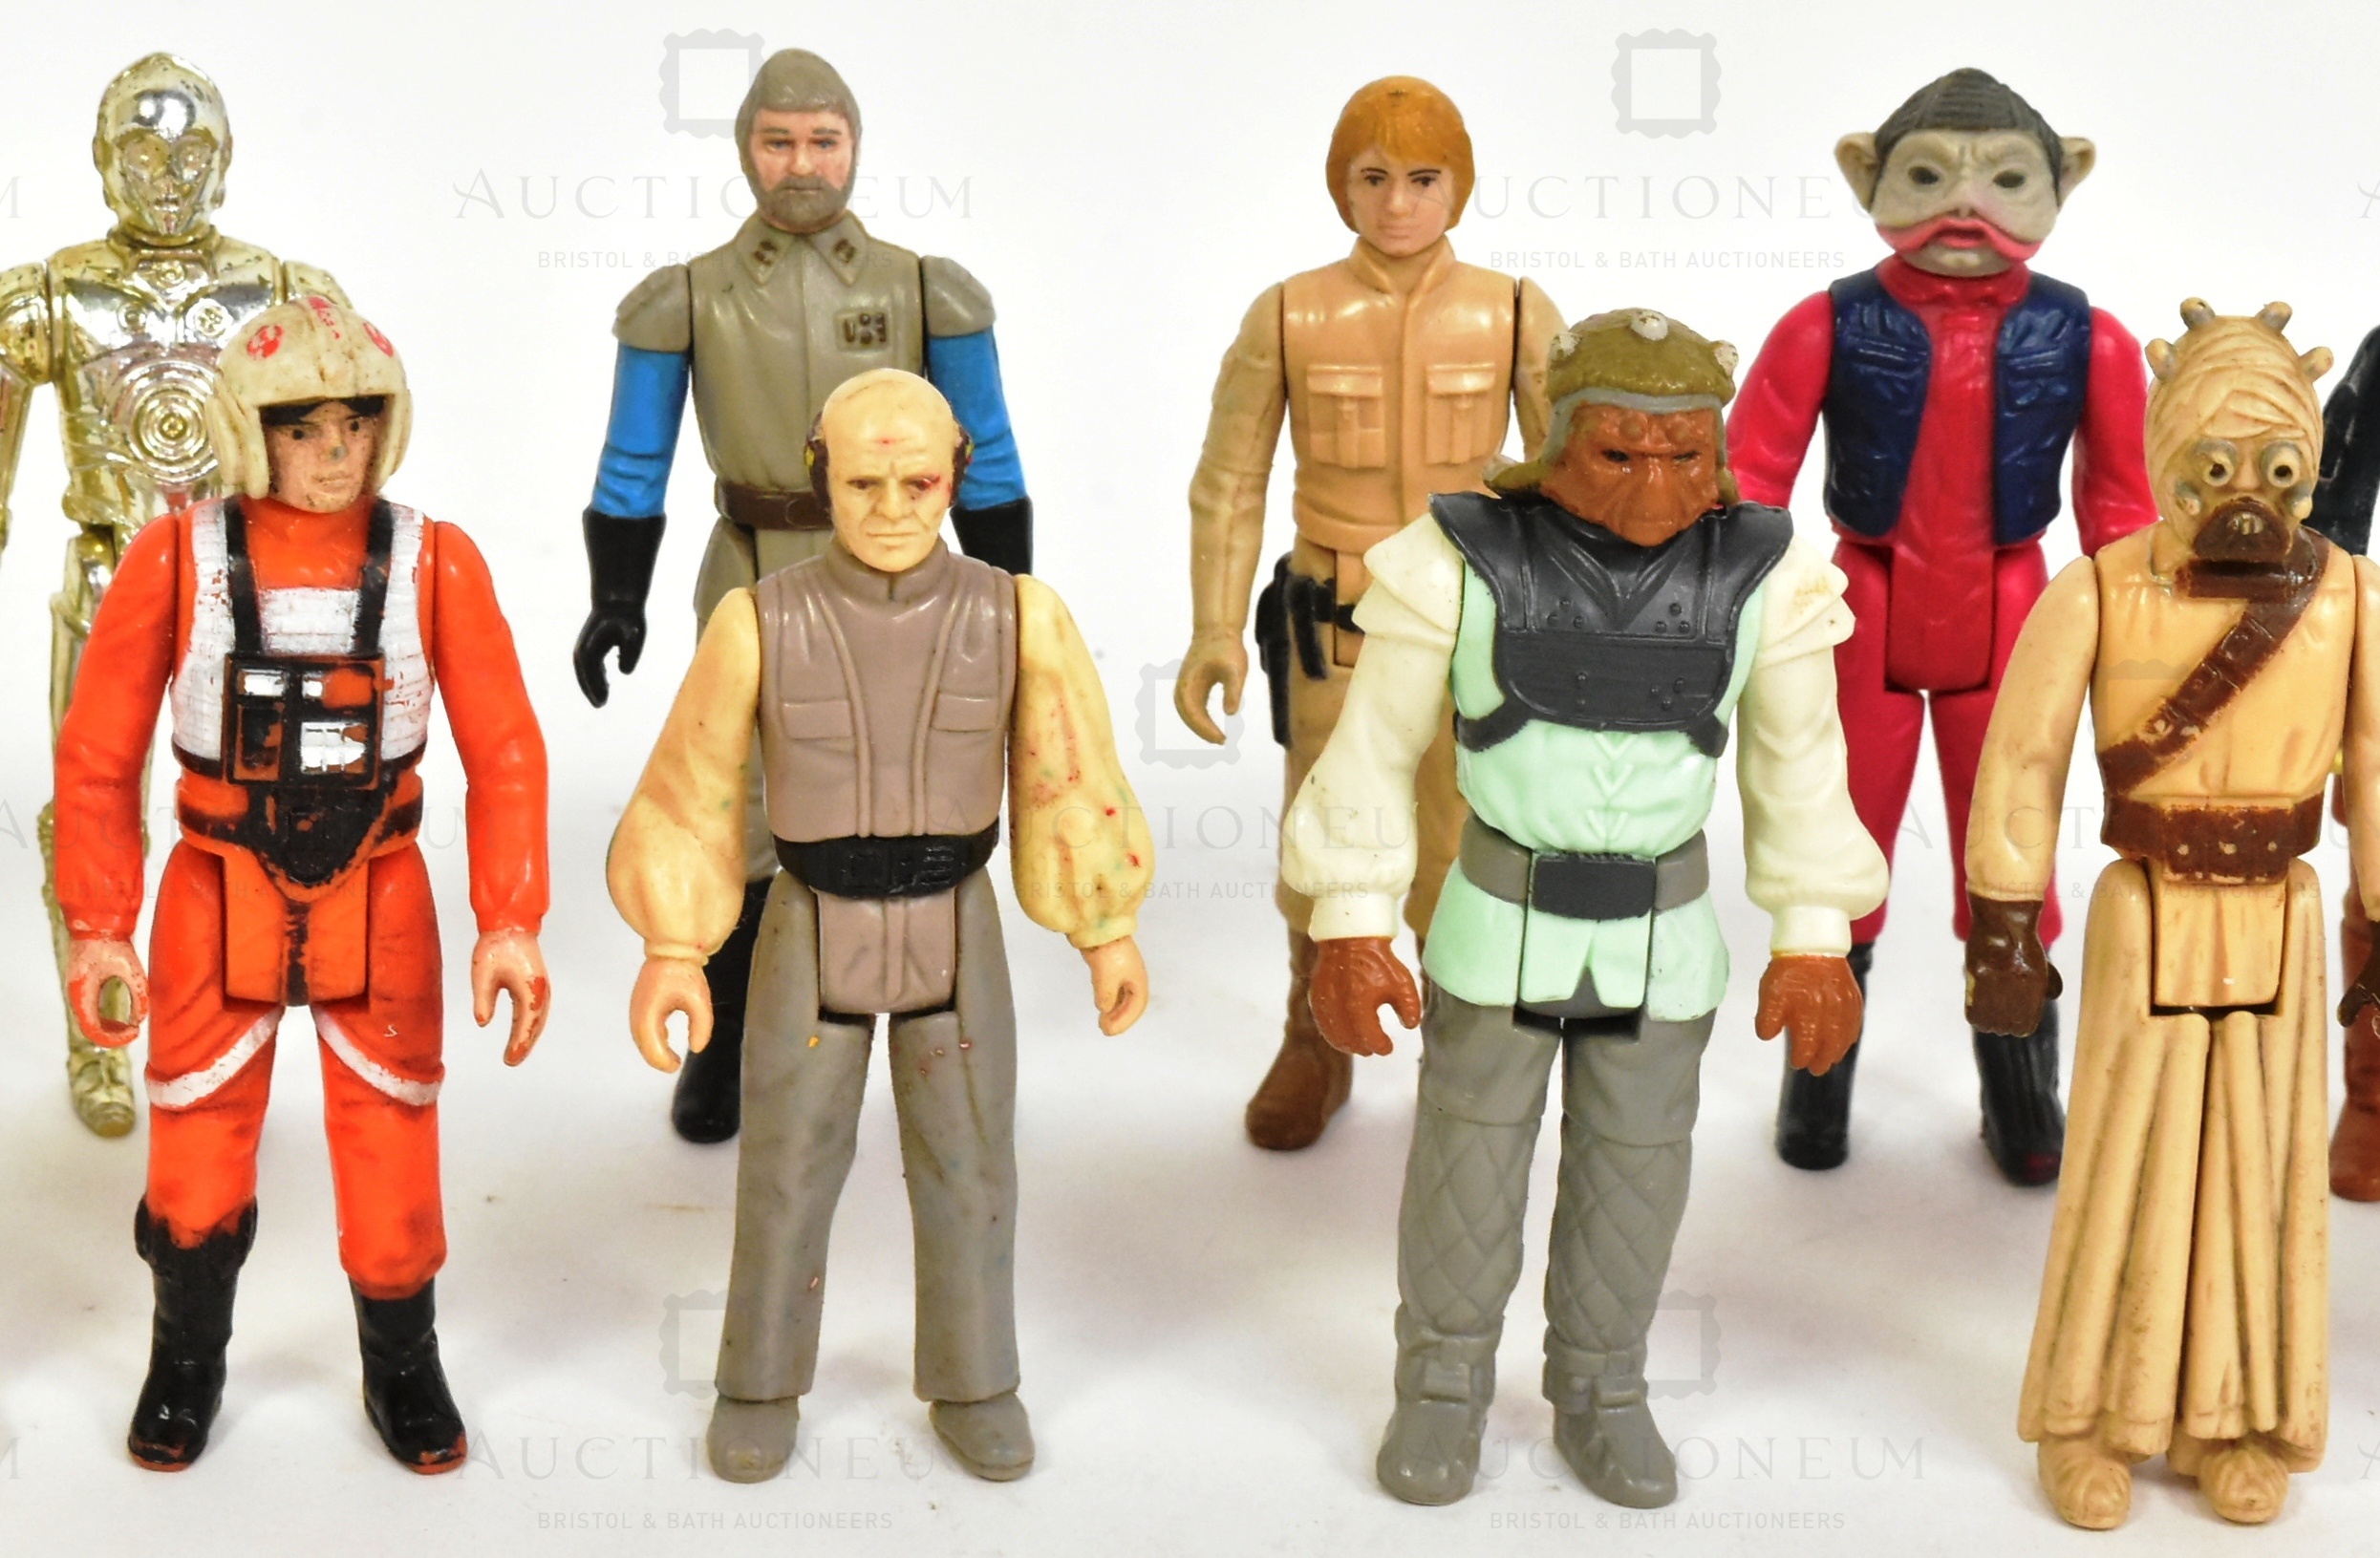 STAR WARS - COLLECTION OF VINTAGE ACTION FIGURES - Image 3 of 6